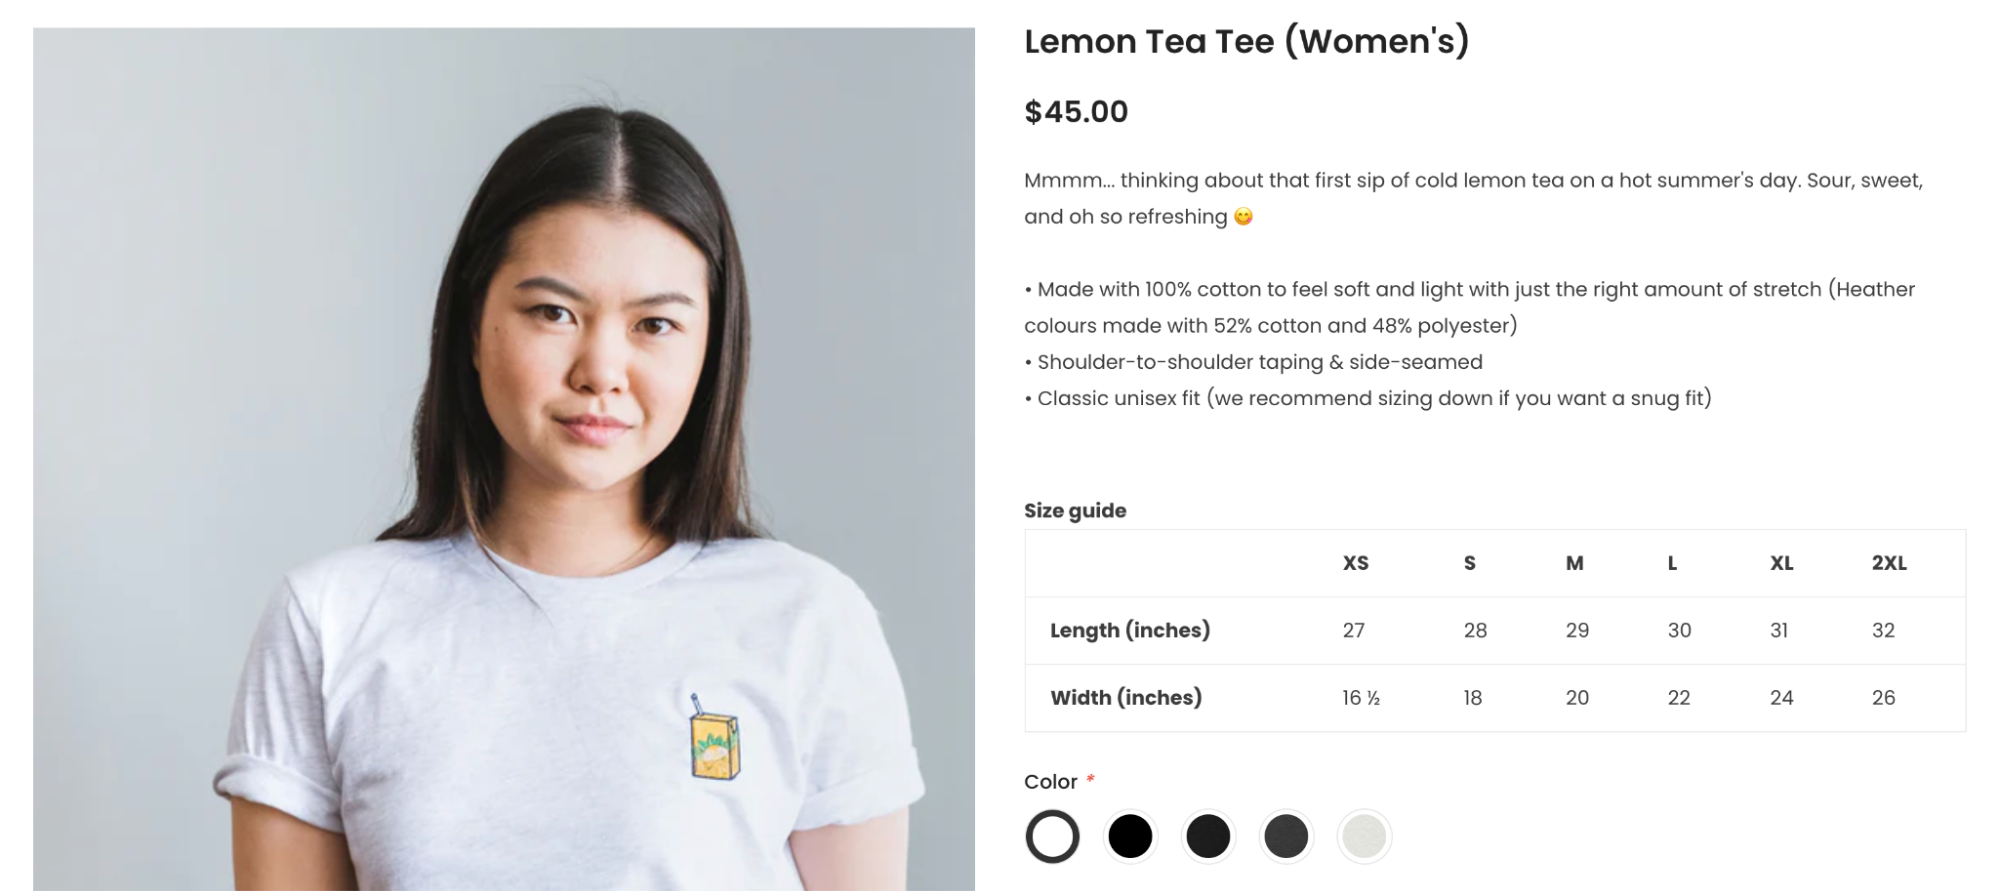 A product page for a white t-shirt with a juice box graphic shows a sizing chart.